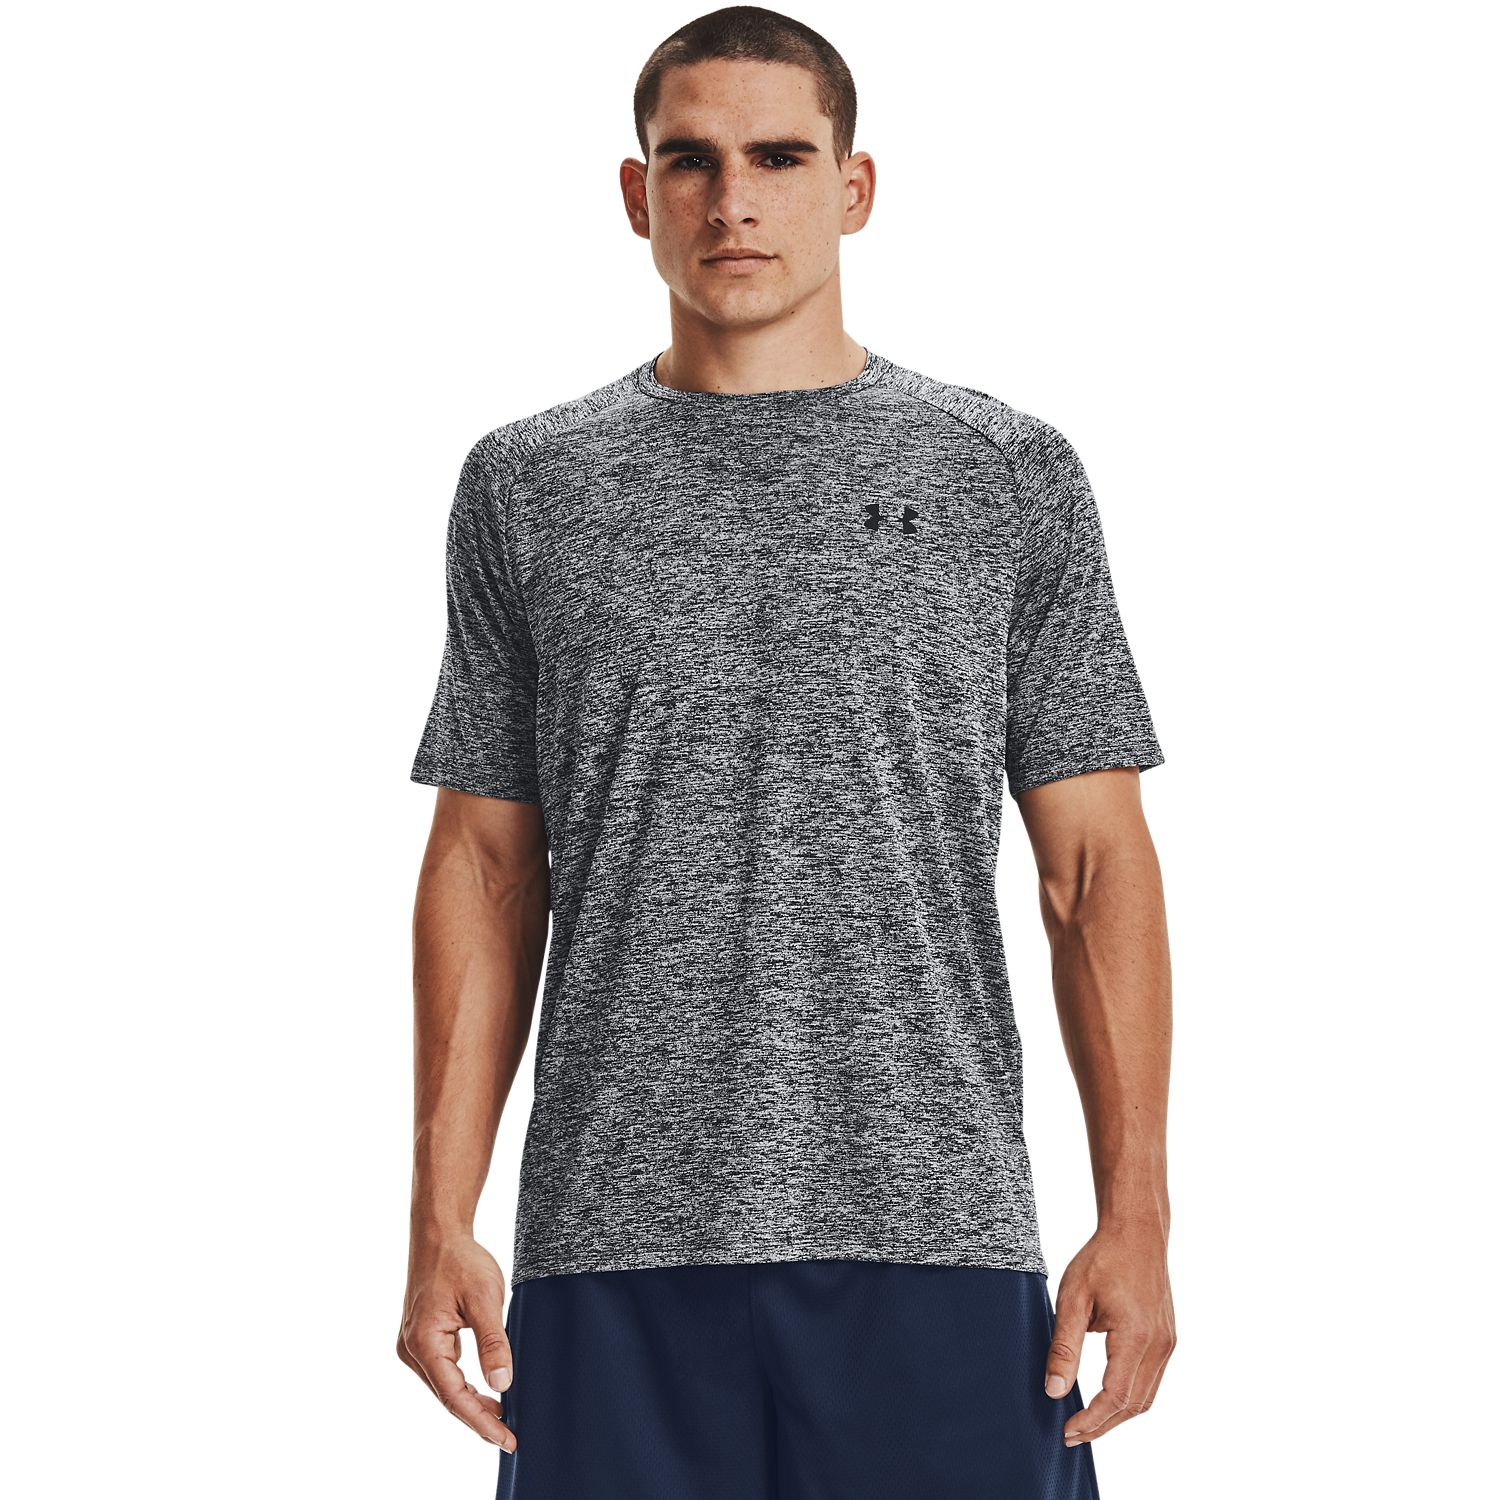 kohl's under armour shirts